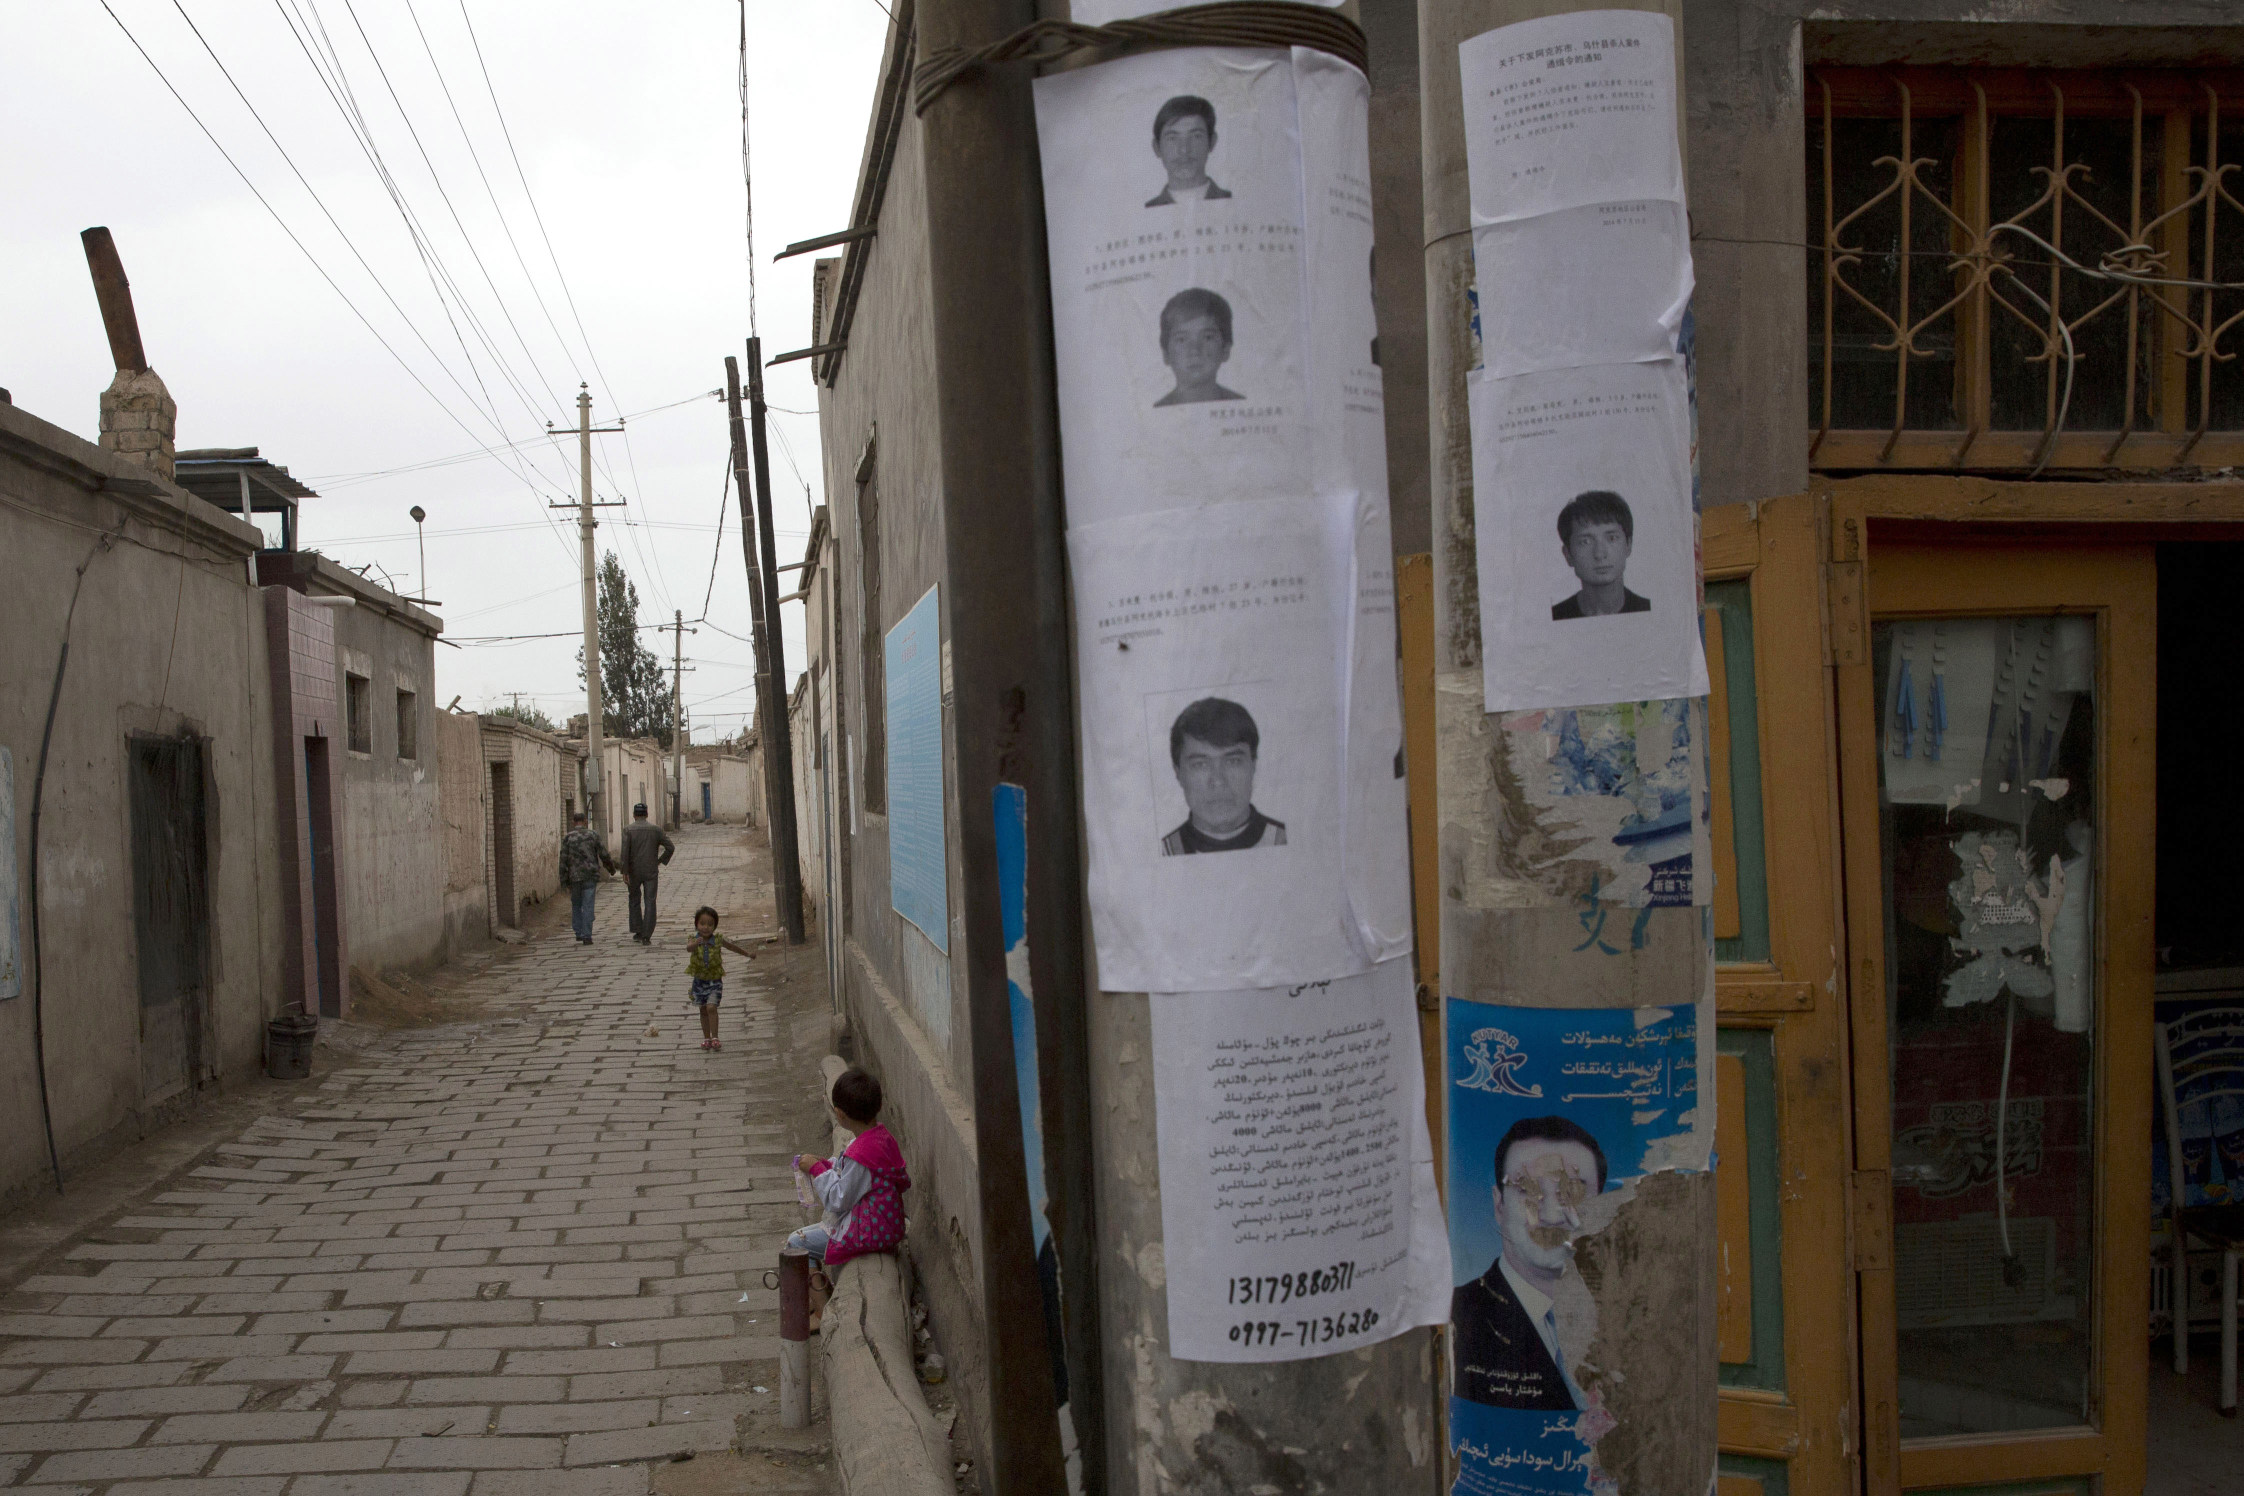 Wanted posters put up in Aksu, Xinjiang, of men suspected to be involved in terrorist attacks. Photo: AP